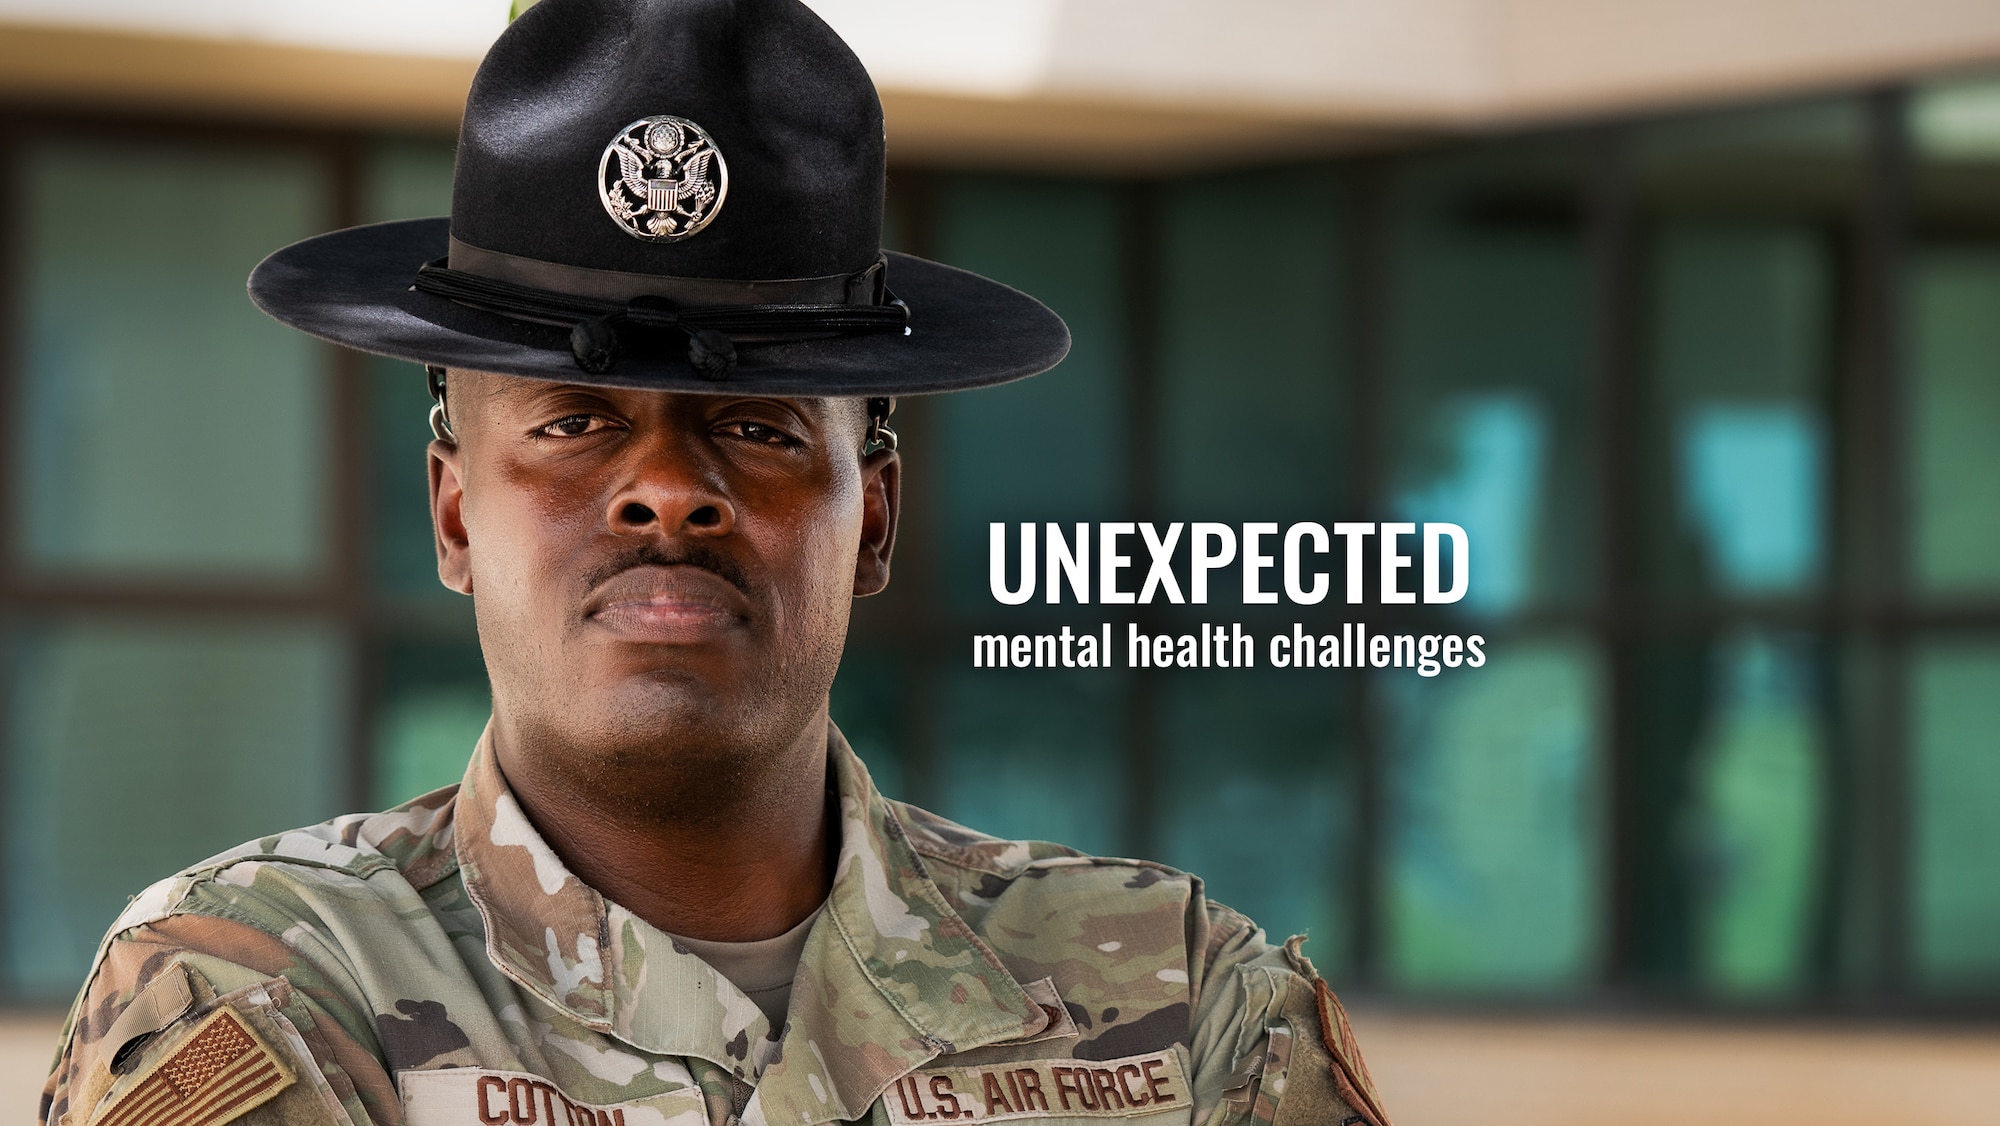 Unexpected mental health challenges